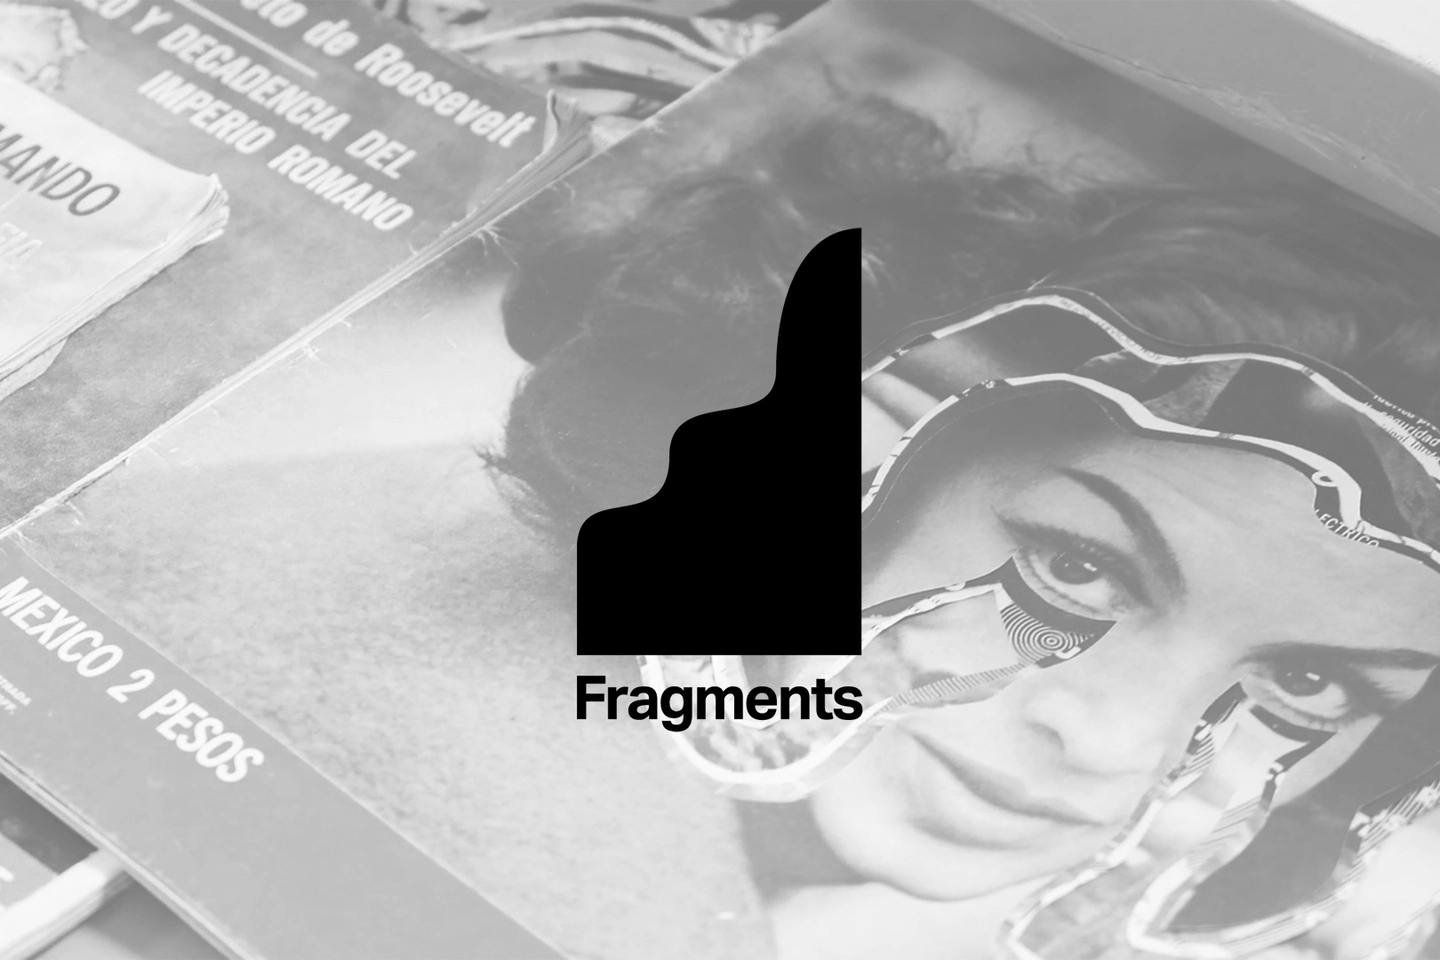 Fragments project